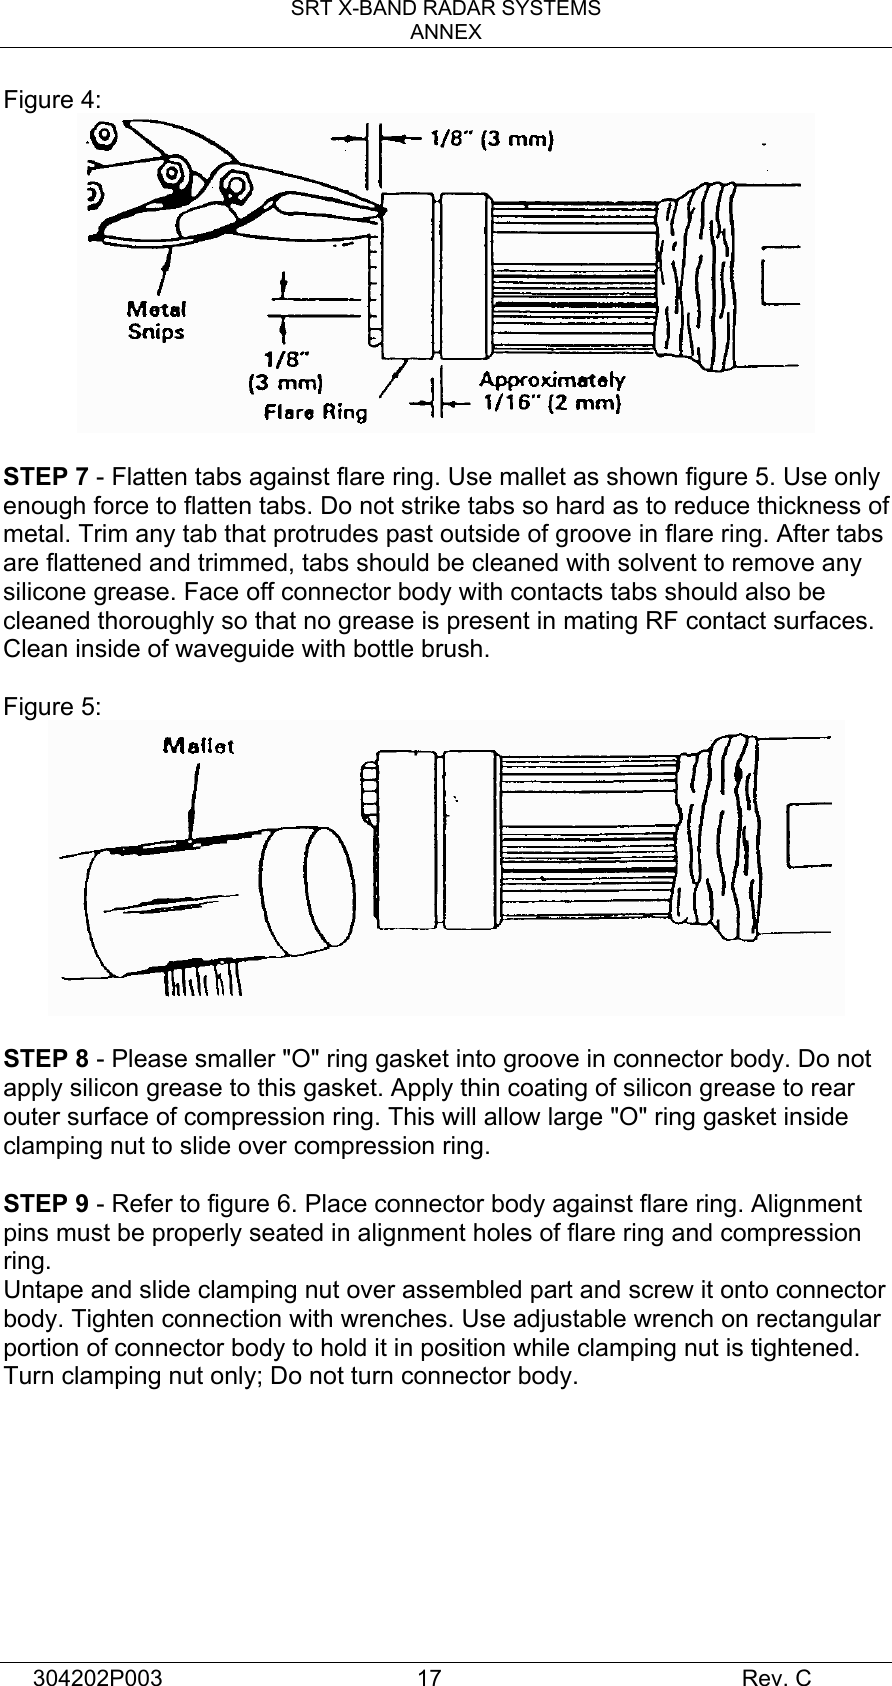 SRT X-BAND RADAR SYSTEMS ANNEX 304202P003  17     Rev. C Figure 4:   STEP 7 - Flatten tabs against flare ring. Use mallet as shown figure 5. Use only enough force to flatten tabs. Do not strike tabs so hard as to reduce thickness of metal. Trim any tab that protrudes past outside of groove in flare ring. After tabs are flattened and trimmed, tabs should be cleaned with solvent to remove any silicone grease. Face off connector body with contacts tabs should also be cleaned thoroughly so that no grease is present in mating RF contact surfaces. Clean inside of waveguide with bottle brush.  Figure 5:   STEP 8 - Please smaller &quot;O&quot; ring gasket into groove in connector body. Do not apply silicon grease to this gasket. Apply thin coating of silicon grease to rear outer surface of compression ring. This will allow large &quot;O&quot; ring gasket inside clamping nut to slide over compression ring.  STEP 9 - Refer to figure 6. Place connector body against flare ring. Alignment pins must be properly seated in alignment holes of flare ring and compression ring. Untape and slide clamping nut over assembled part and screw it onto connector body. Tighten connection with wrenches. Use adjustable wrench on rectangular portion of connector body to hold it in position while clamping nut is tightened. Turn clamping nut only; Do not turn connector body.         